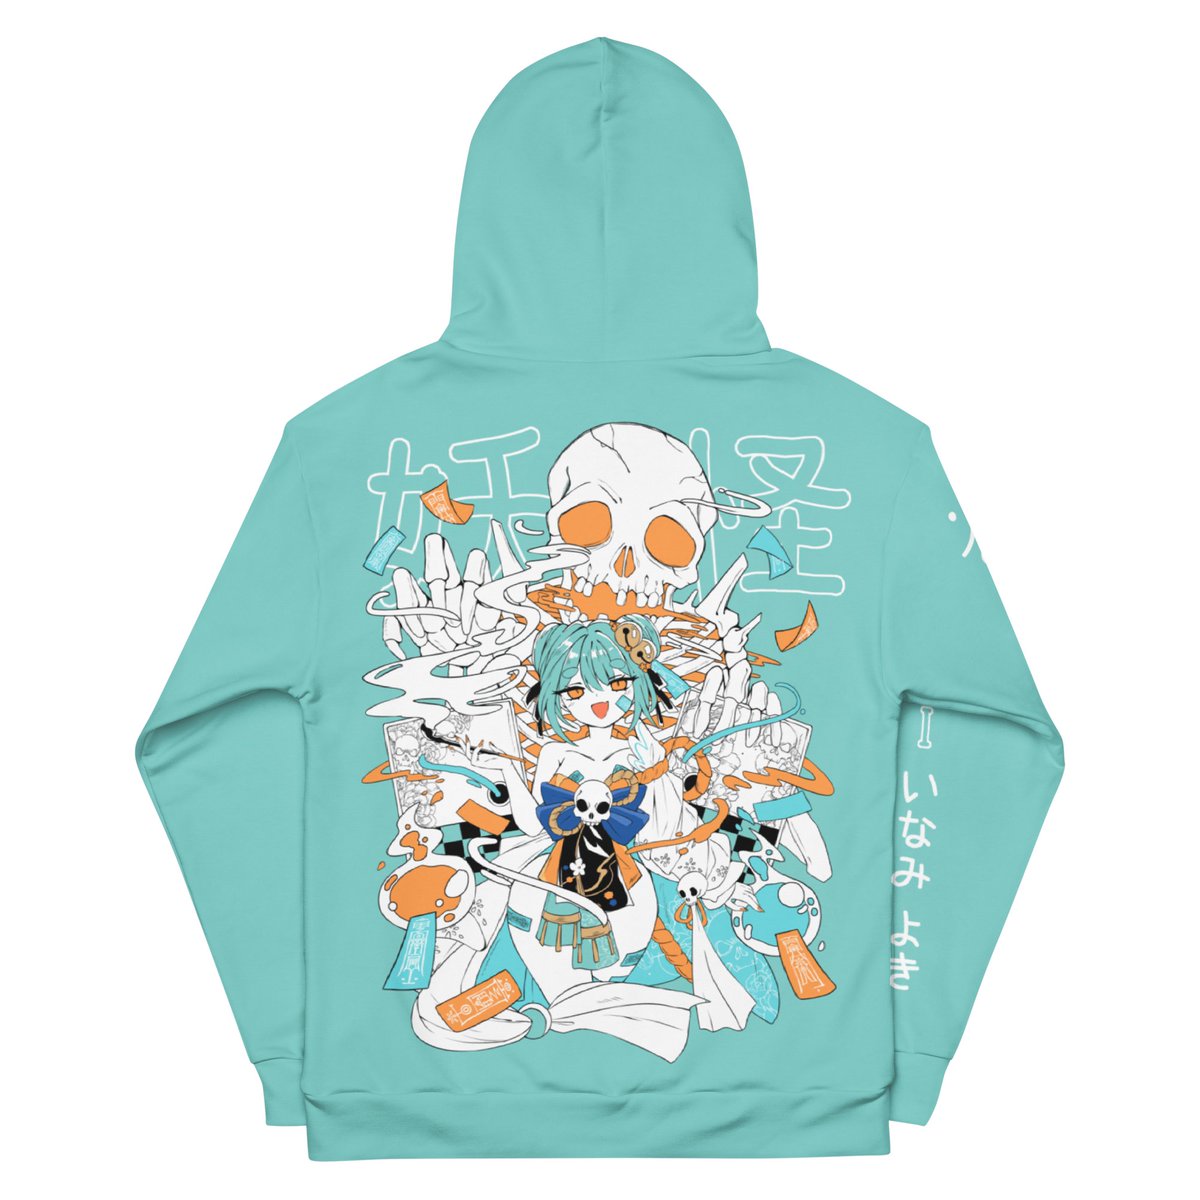 [🏮 Giveaway🏮] We are giving away one of my hoodies from Pastel Melon! Now is your chance to get one if you haven't already! 📝» Follow + Like + RT + Comment a 🏮 ⏰» Monday, April 1st , 3PM EST